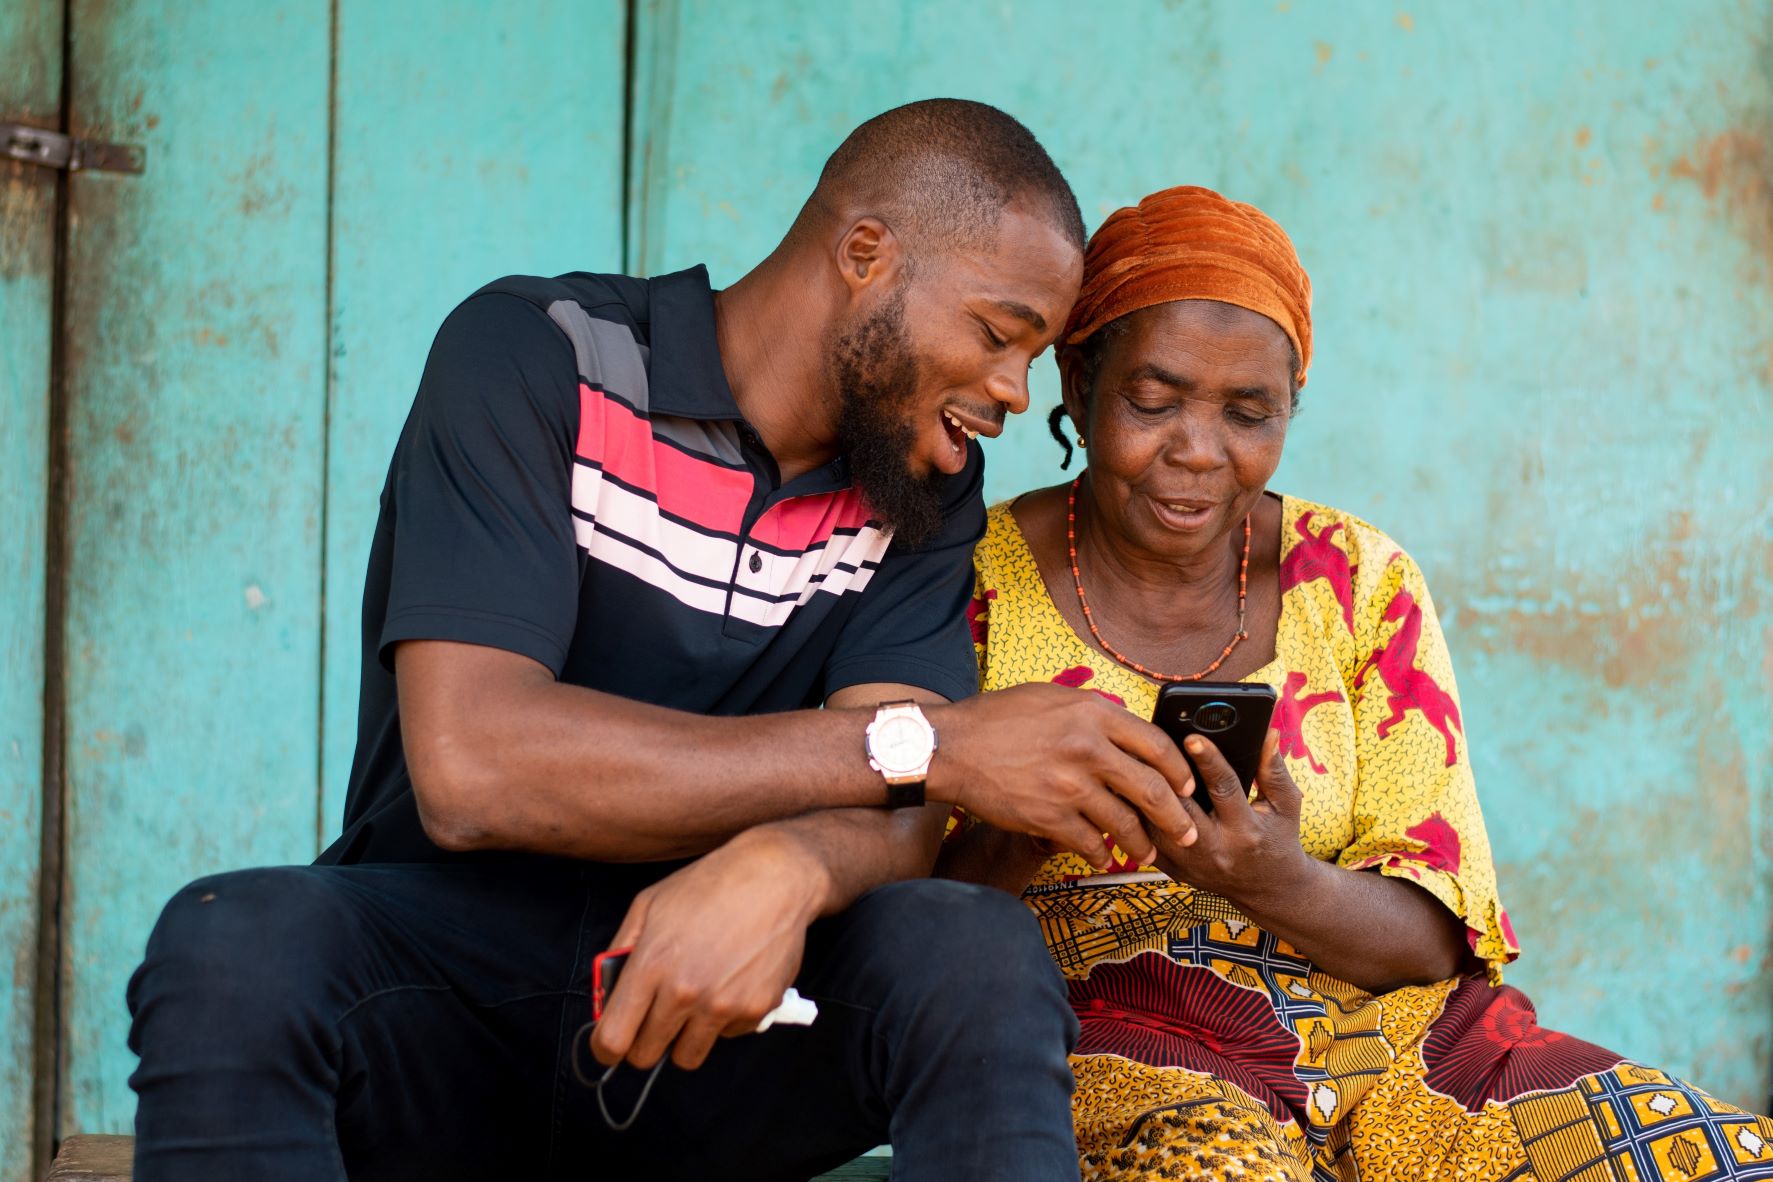 Young Man Helping Older Woman With Smartphone